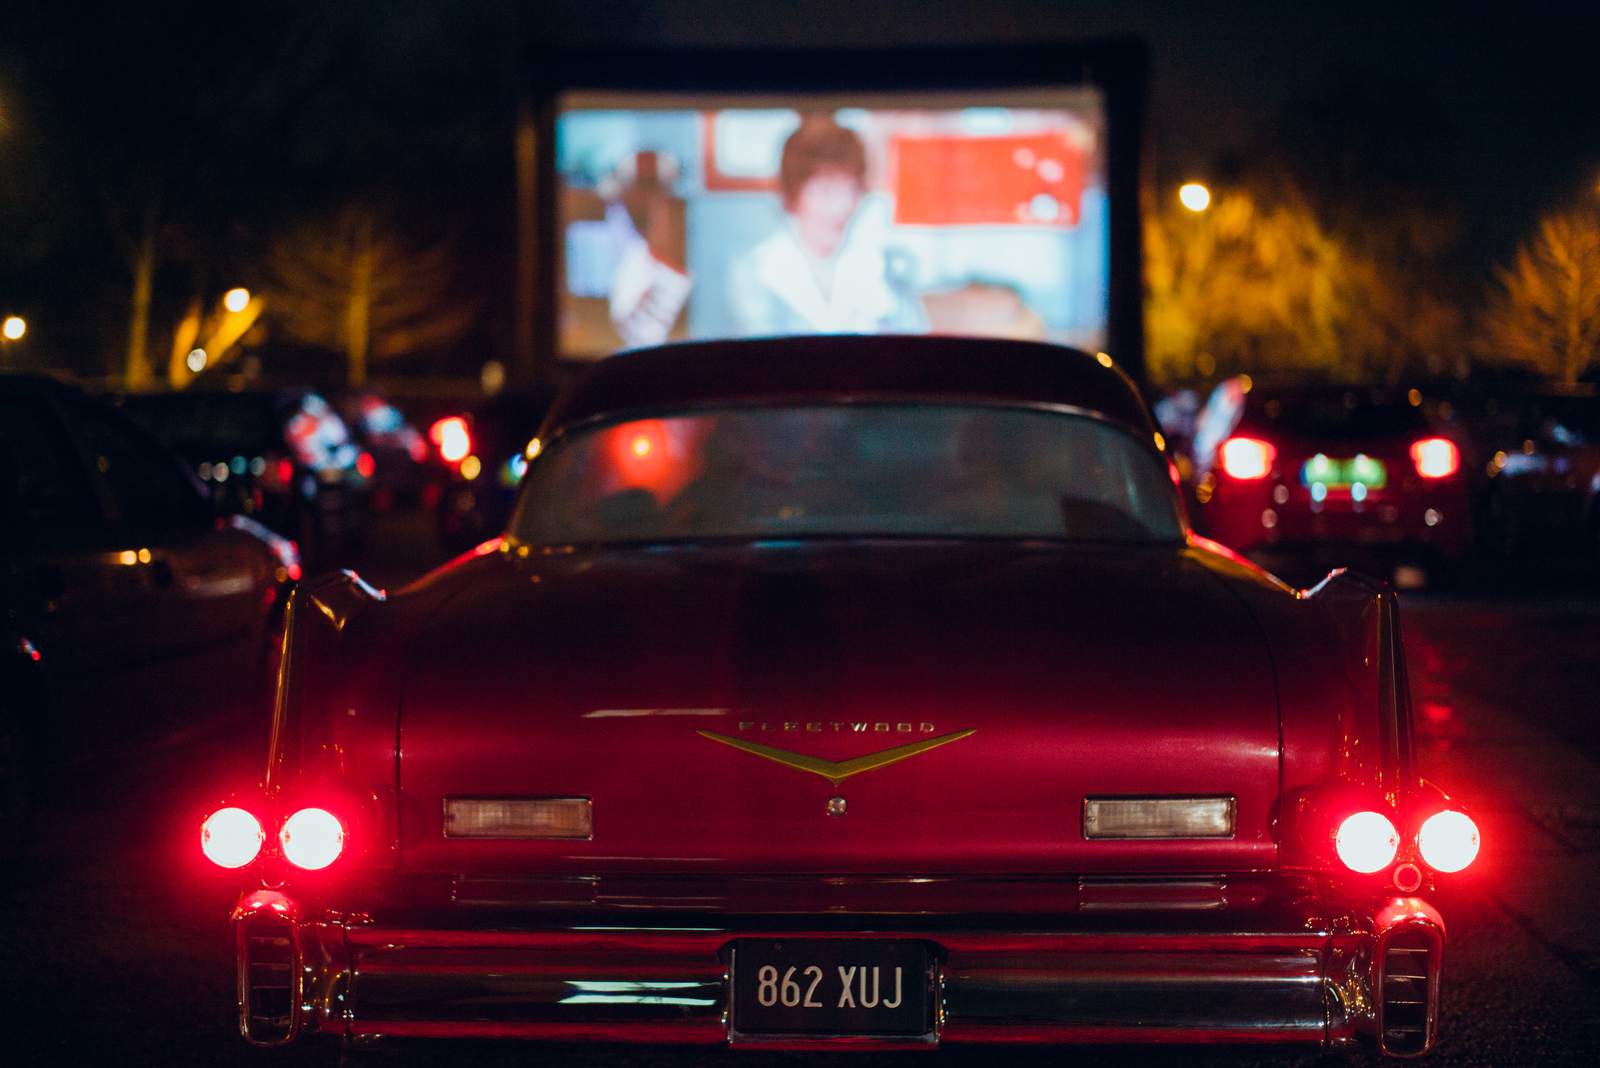 Rooftop Cinema Club’s new drive-in theater rolls into Houston’s EaDo district with holiday movie lineup